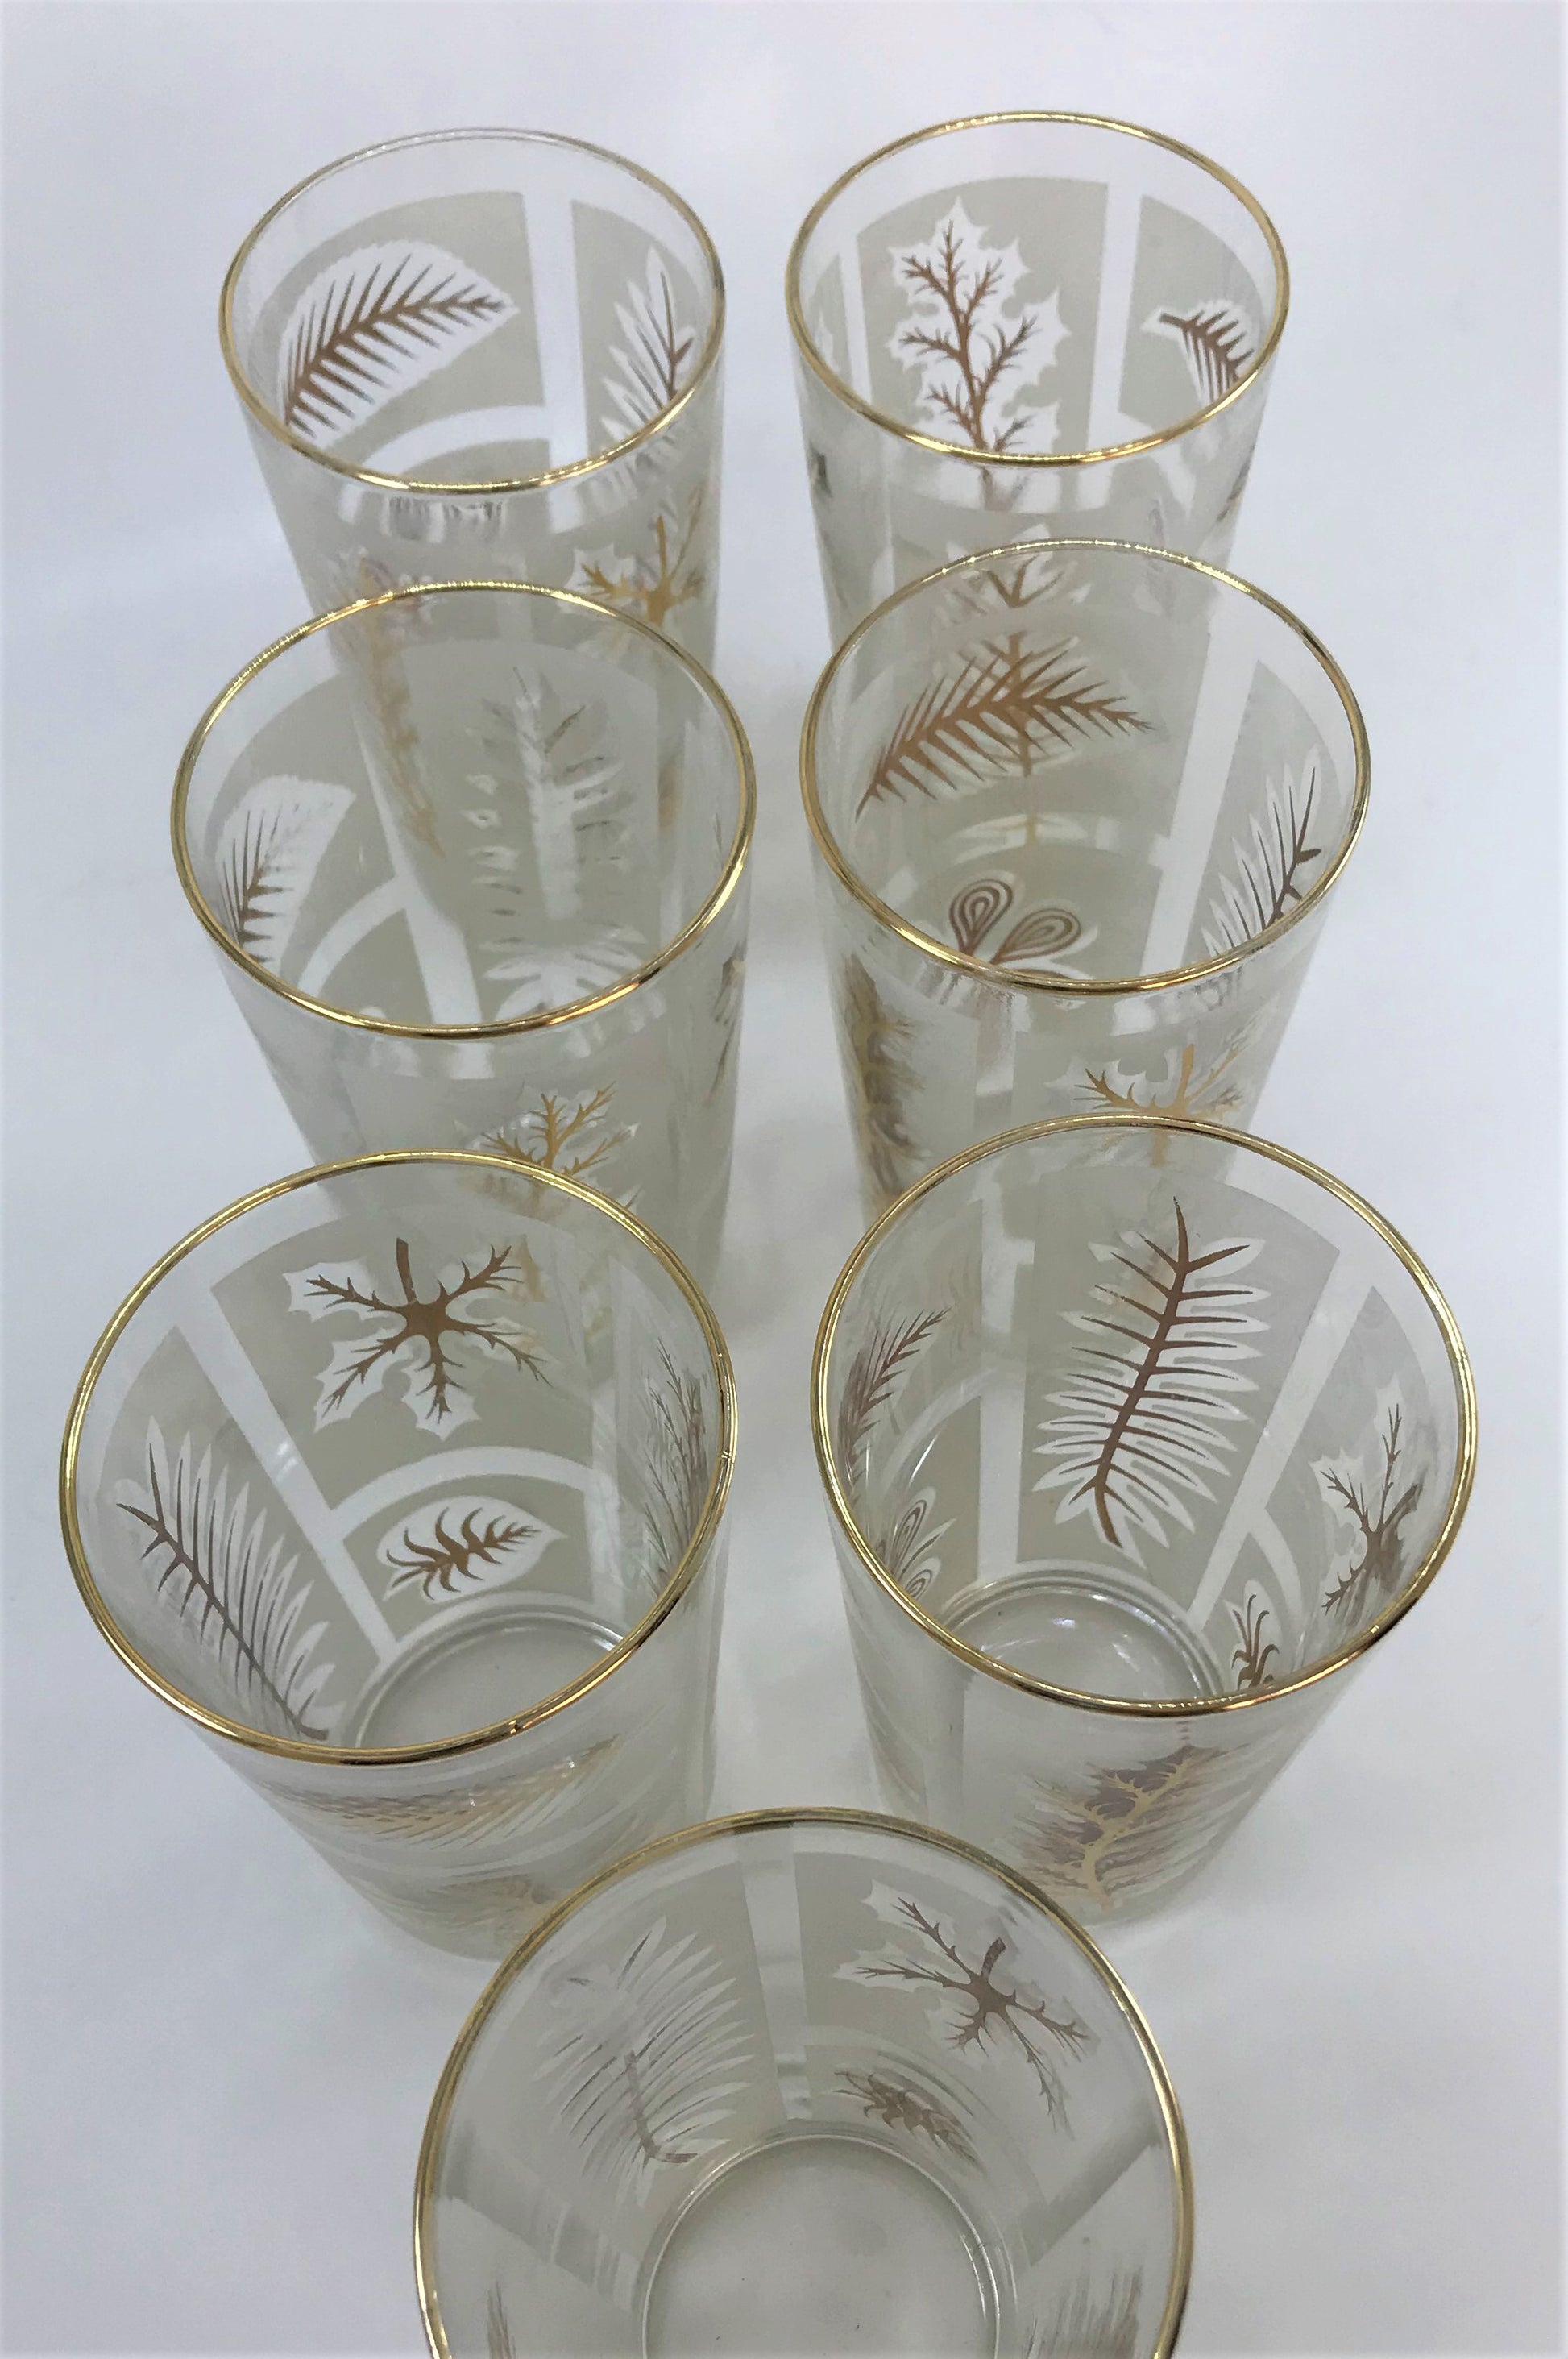 Vintage Drinking Glasses Wheat Pattern by Libbey 1970's set of 6